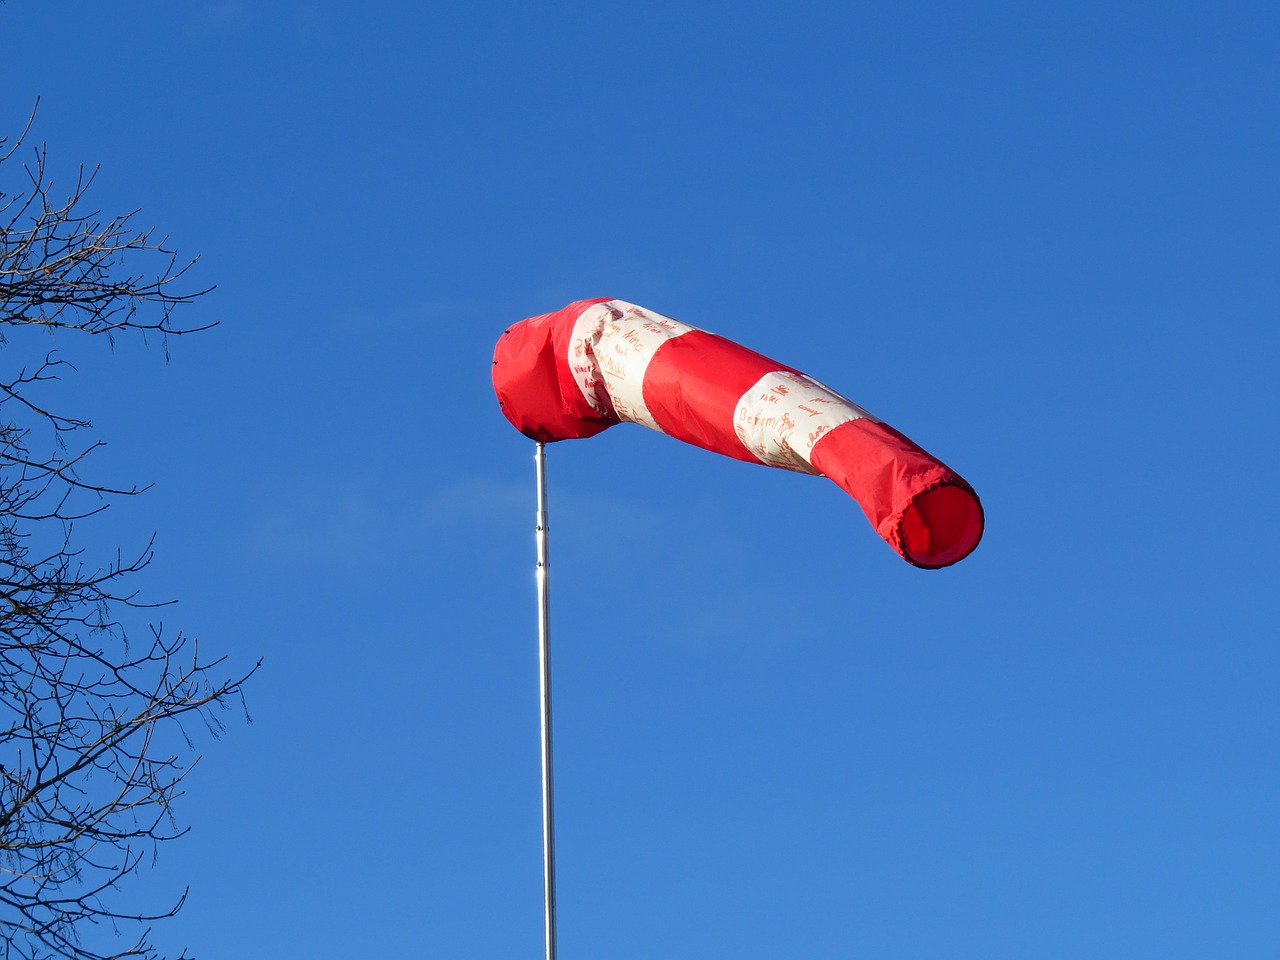 wind direction indicator air bag since wind free photo